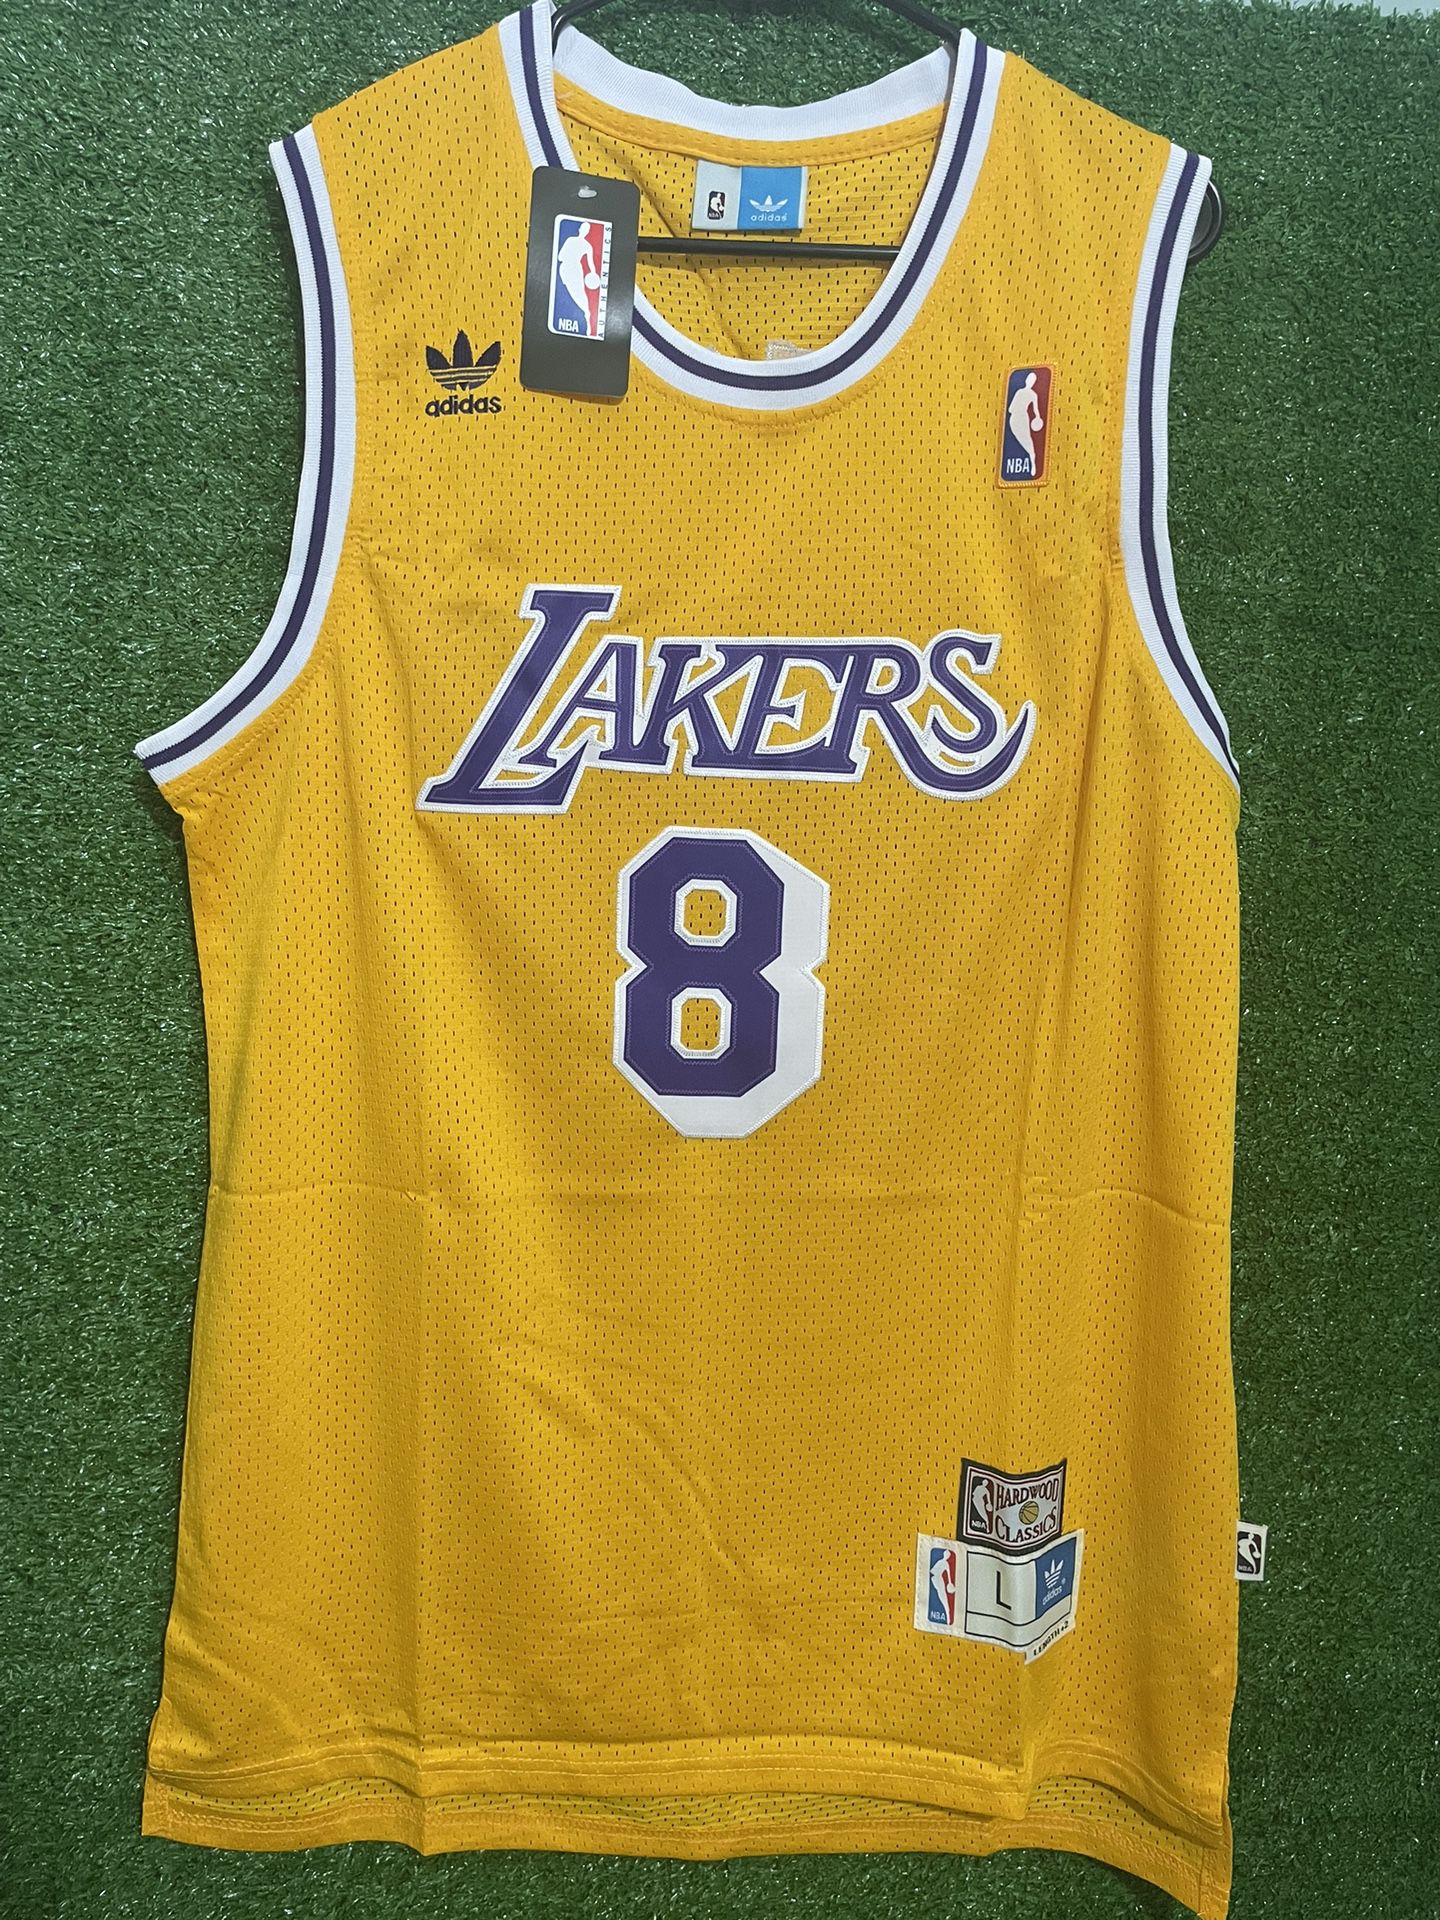 KOBE BRYANT LOS ANGELES LAKERS VINTAGE ADIDAS JERSEY BRAND NEW WITH TAGS SIZES LARGE AND XL AVAILABLE